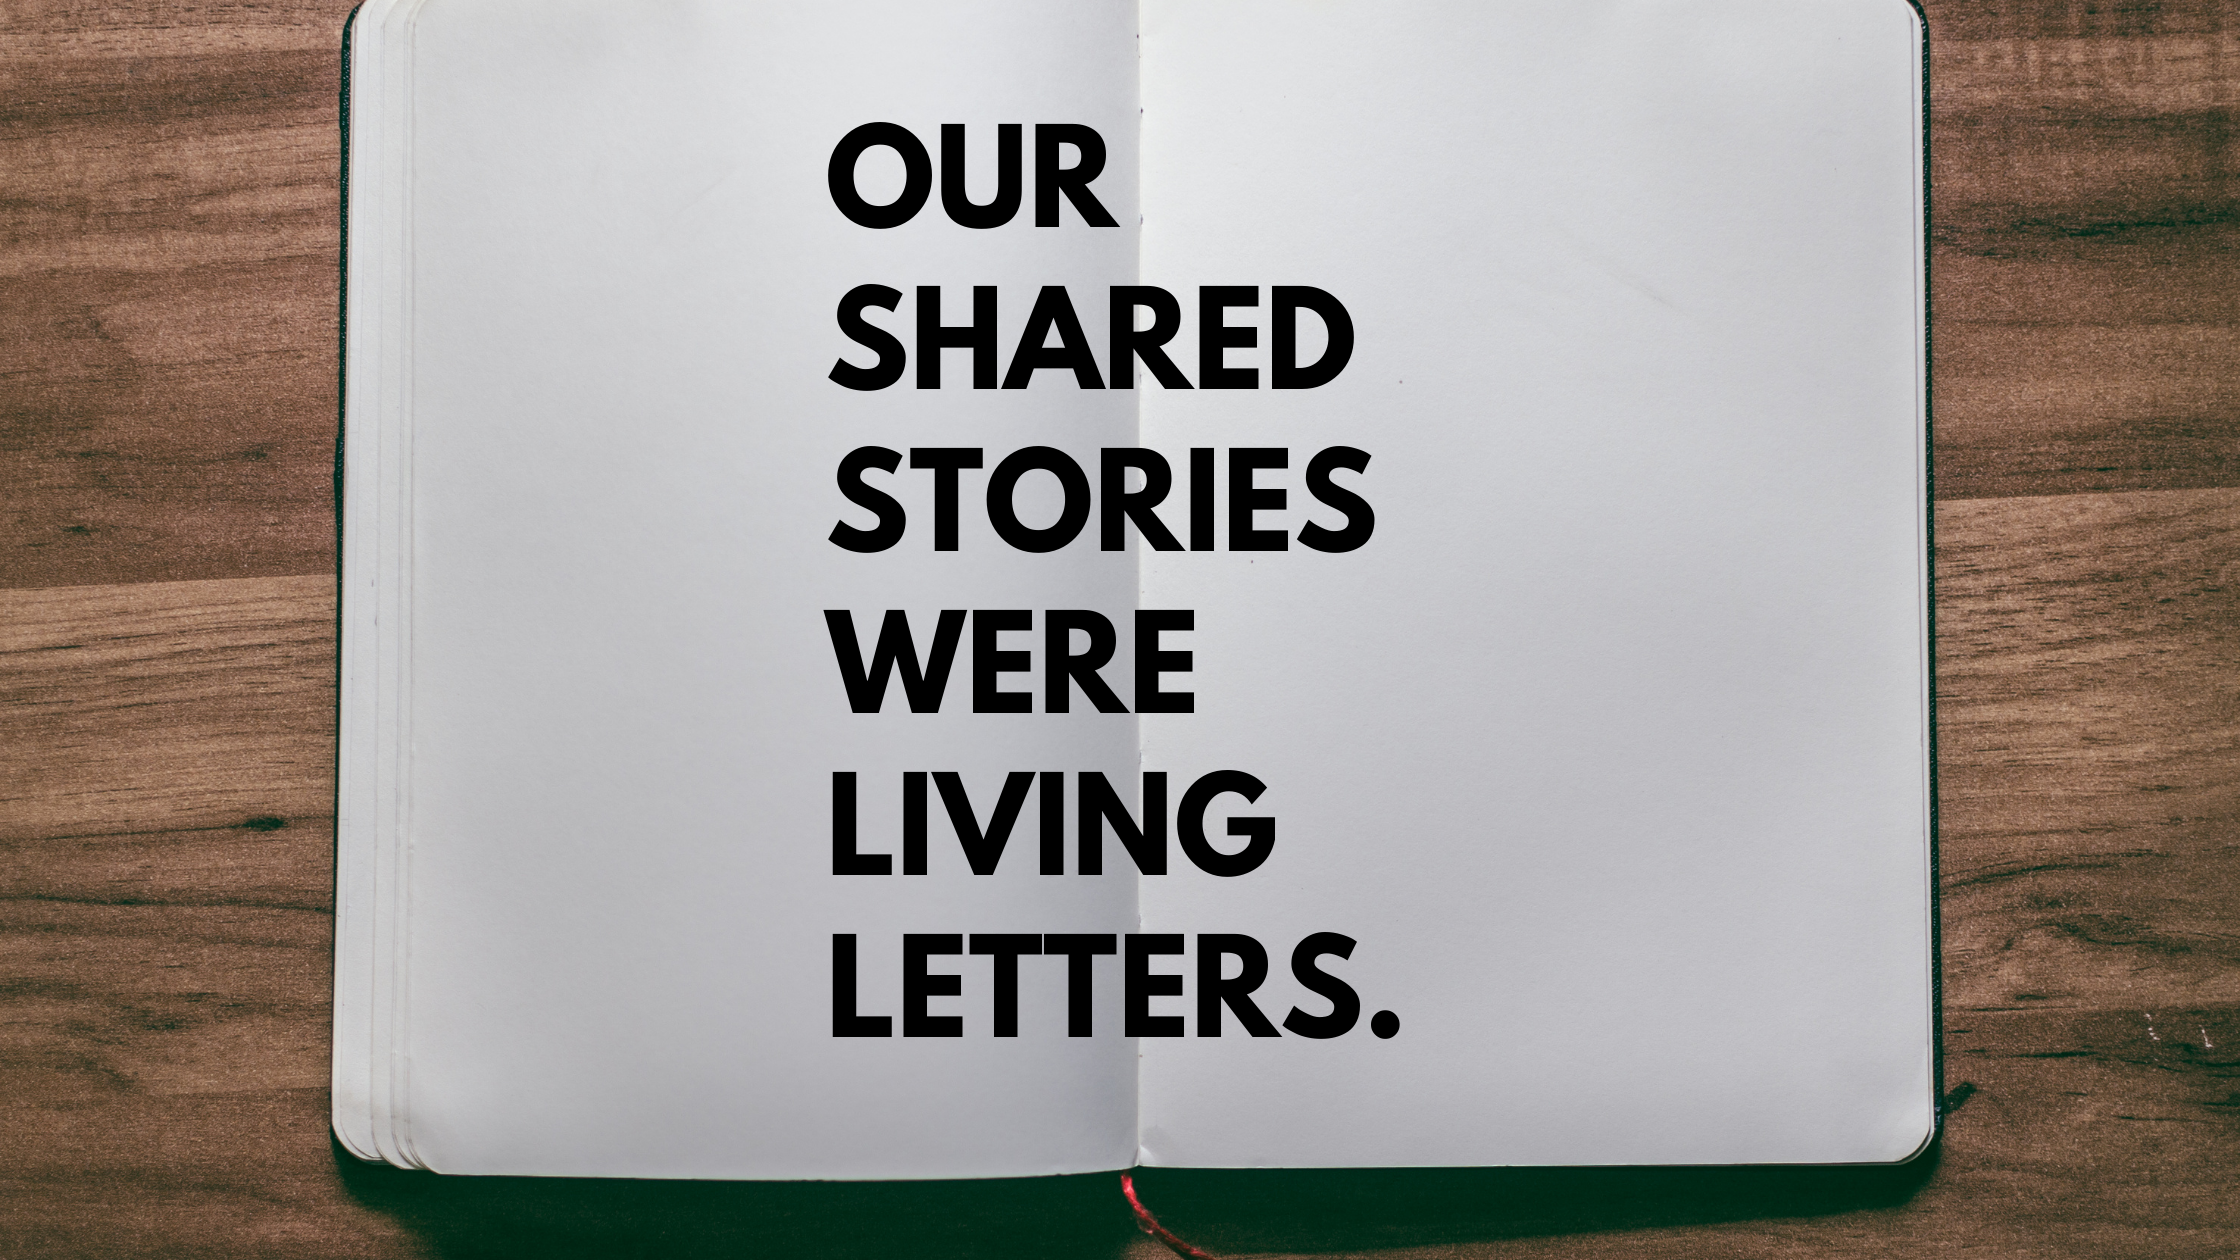 Our shared stories were living letters.